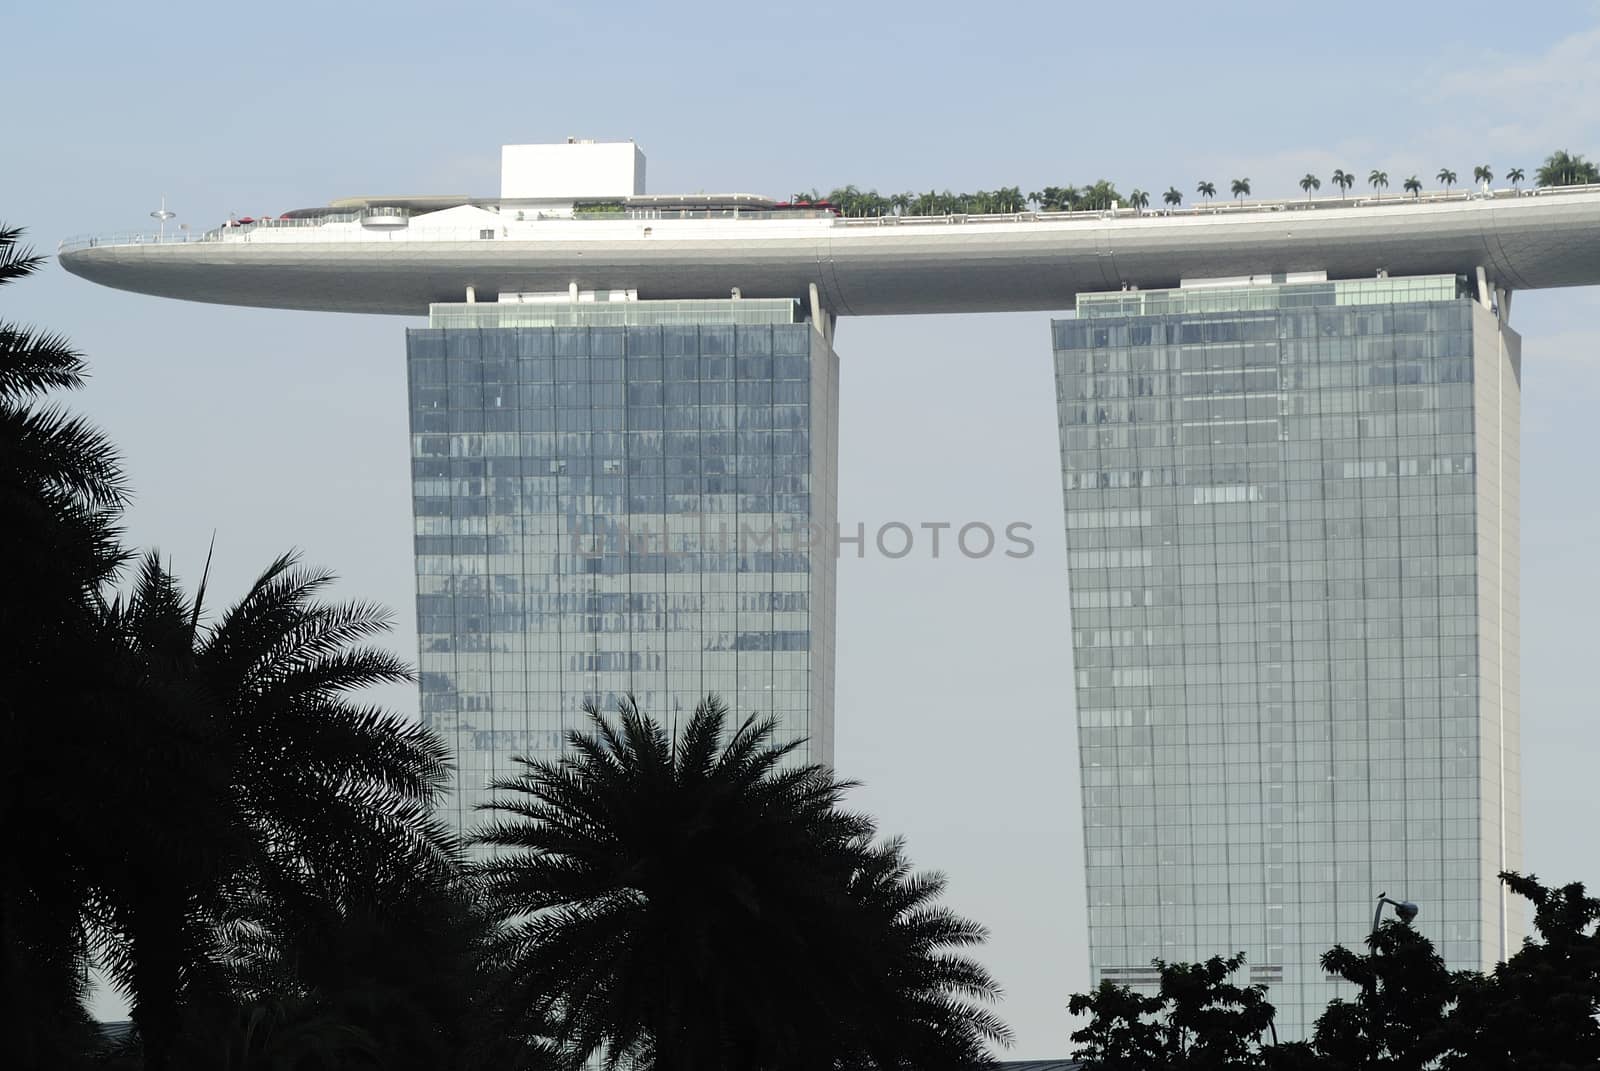 SINGAPORE - APRIL 30: Marina Bay Sands Hotel in day on April 30, by think4photop